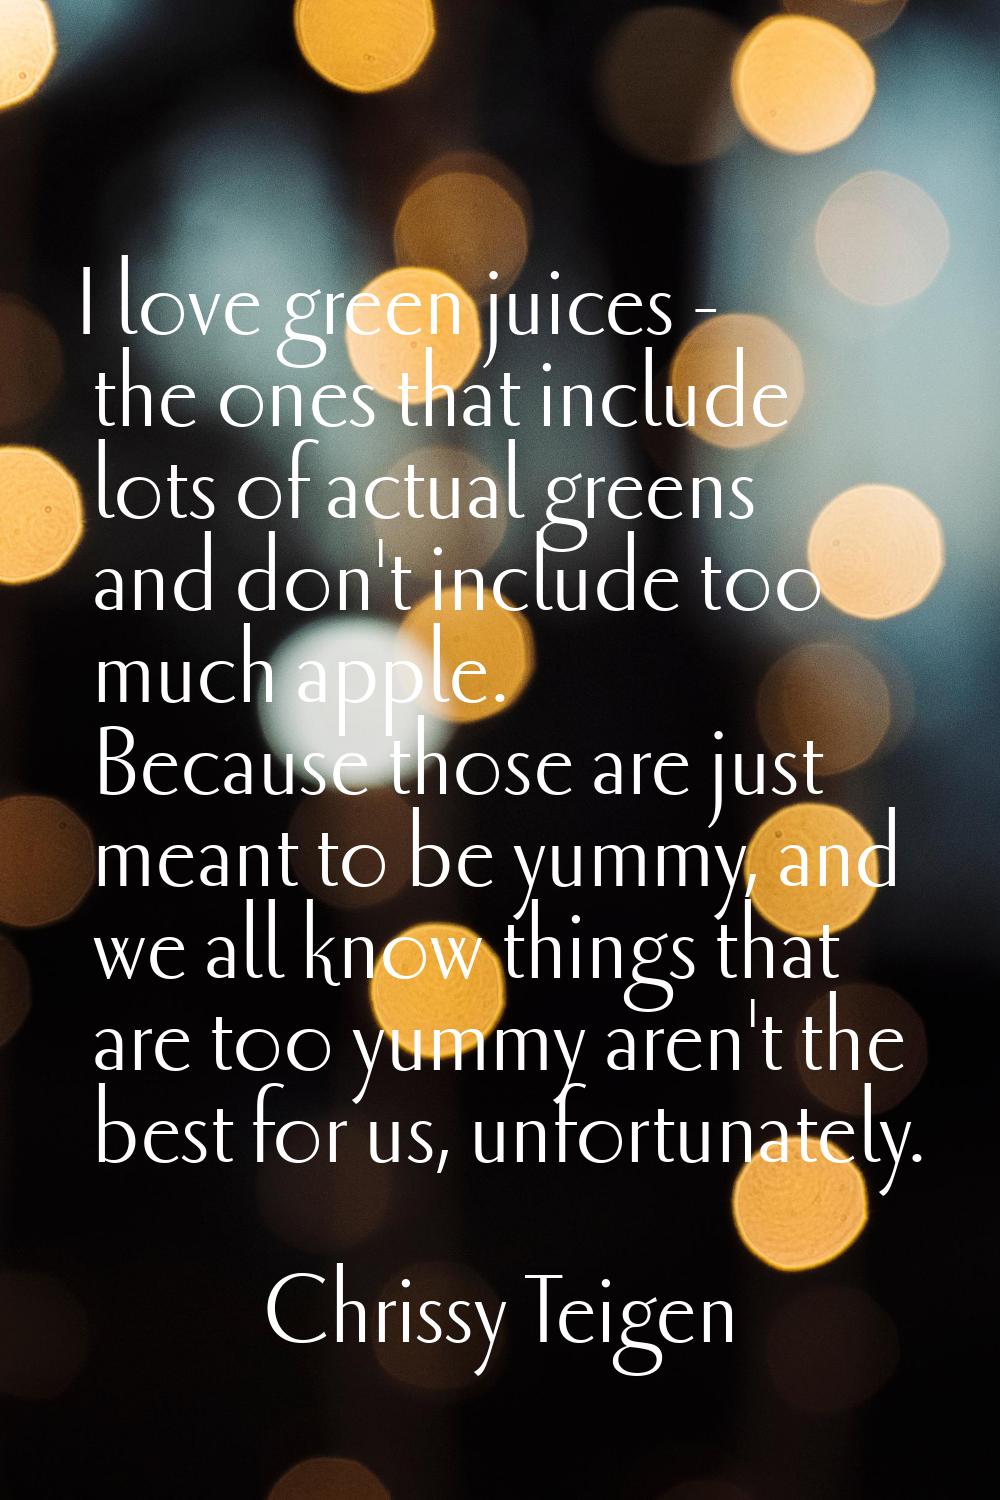 I love green juices - the ones that include lots of actual greens and don't include too much apple.